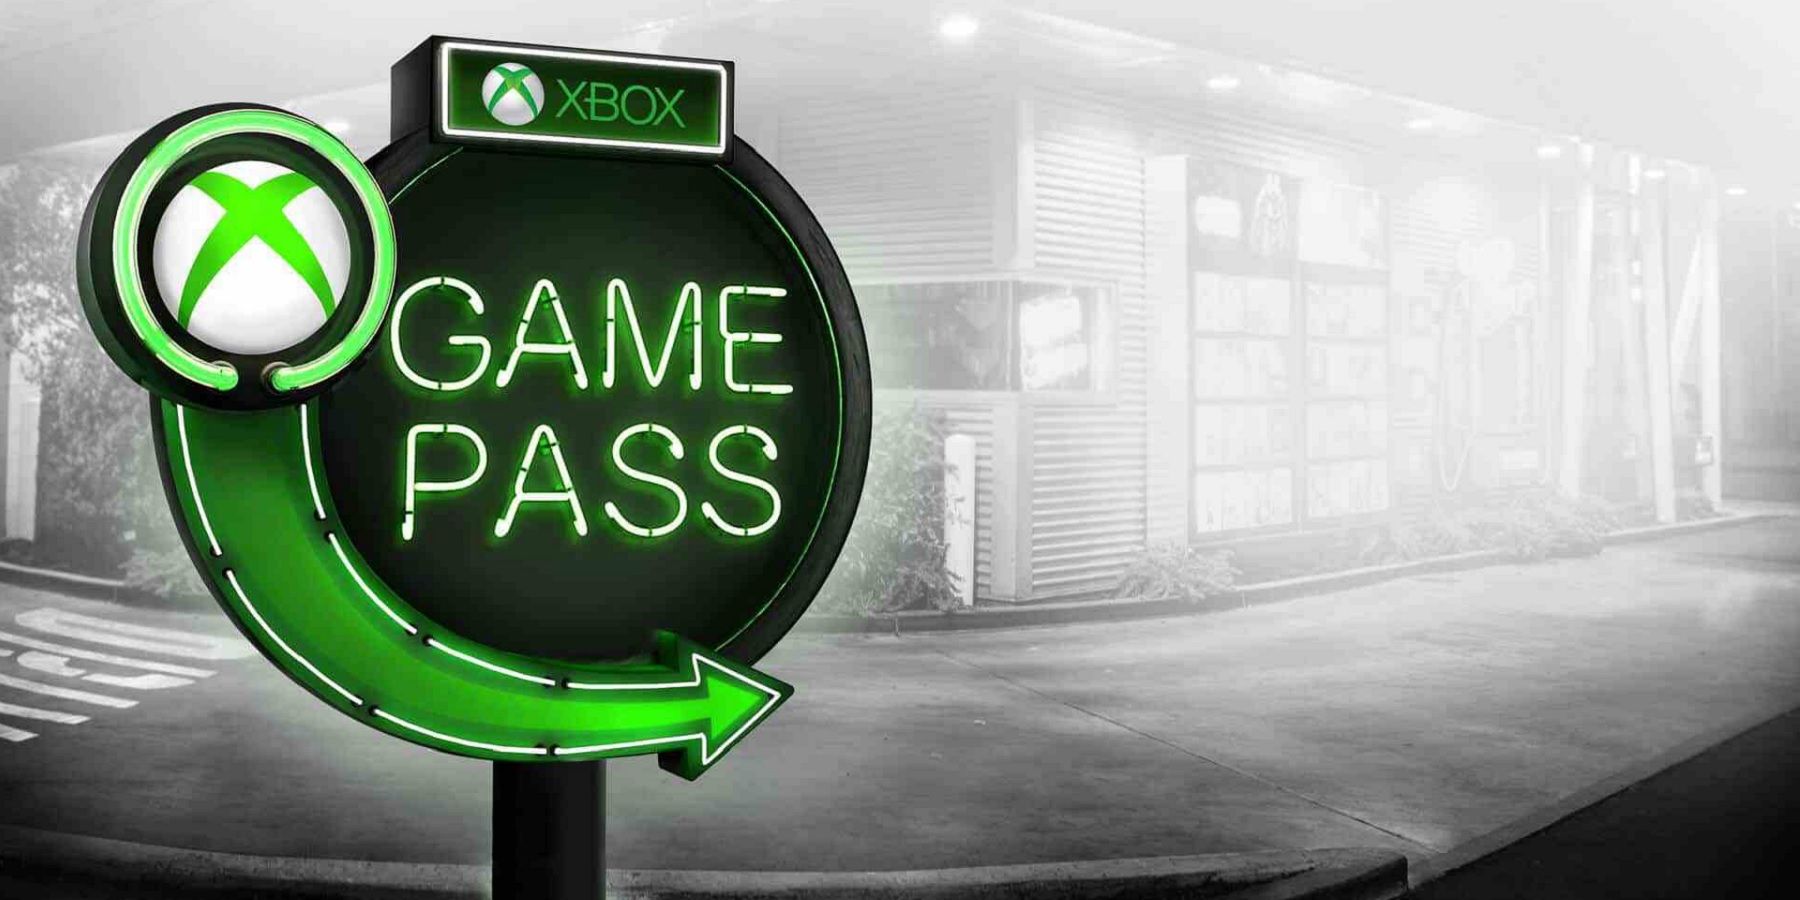 Loop Hero, NHL 23, Ghostwire: Tokyo, and More Coming to Game Pass